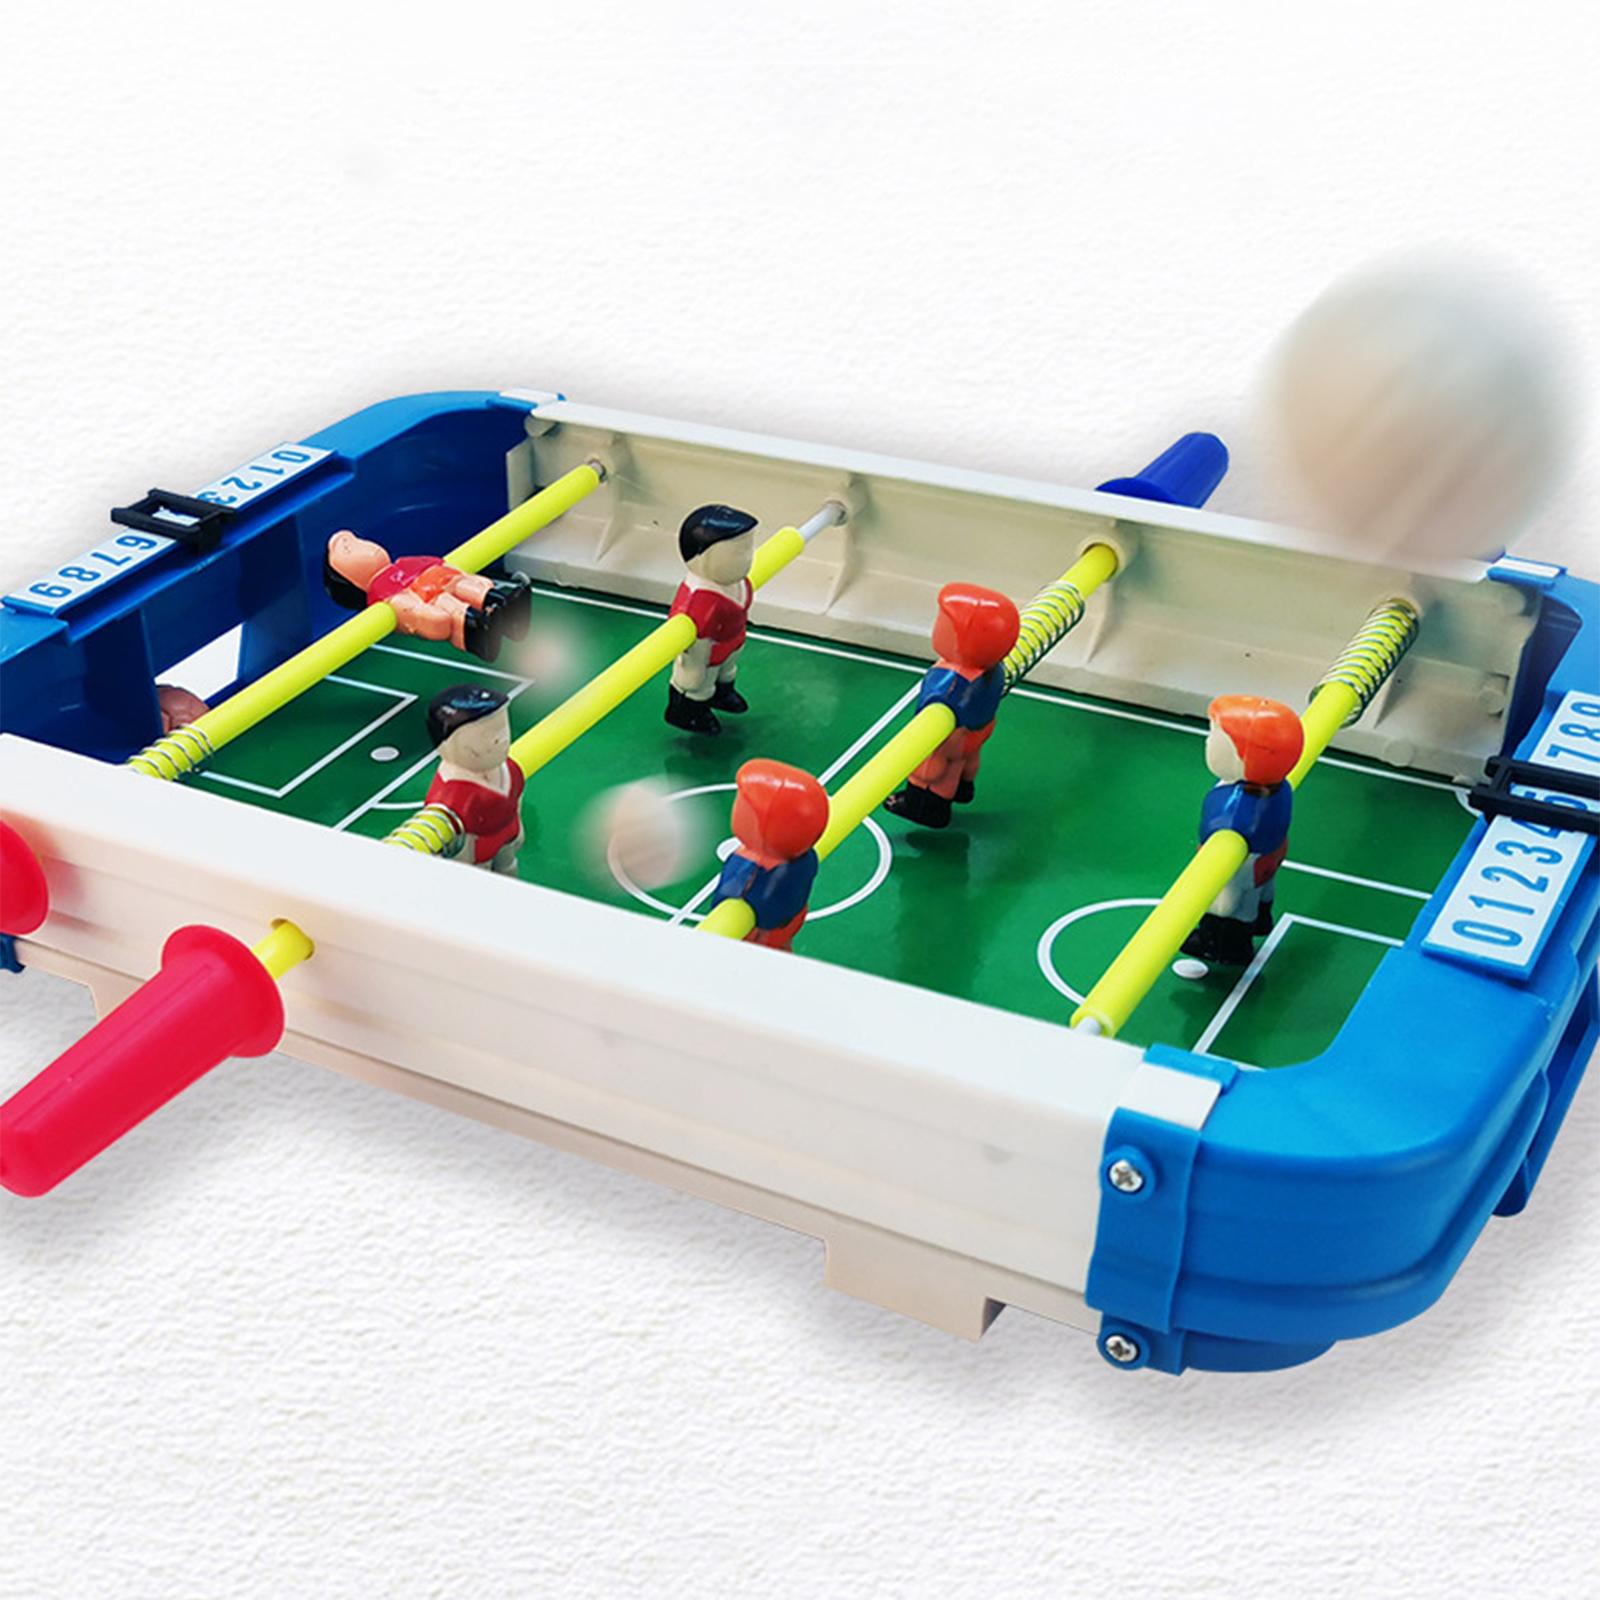 Foosball Table Tabletop Football Game Interactive Toy for Game Rooms Kids Yellow